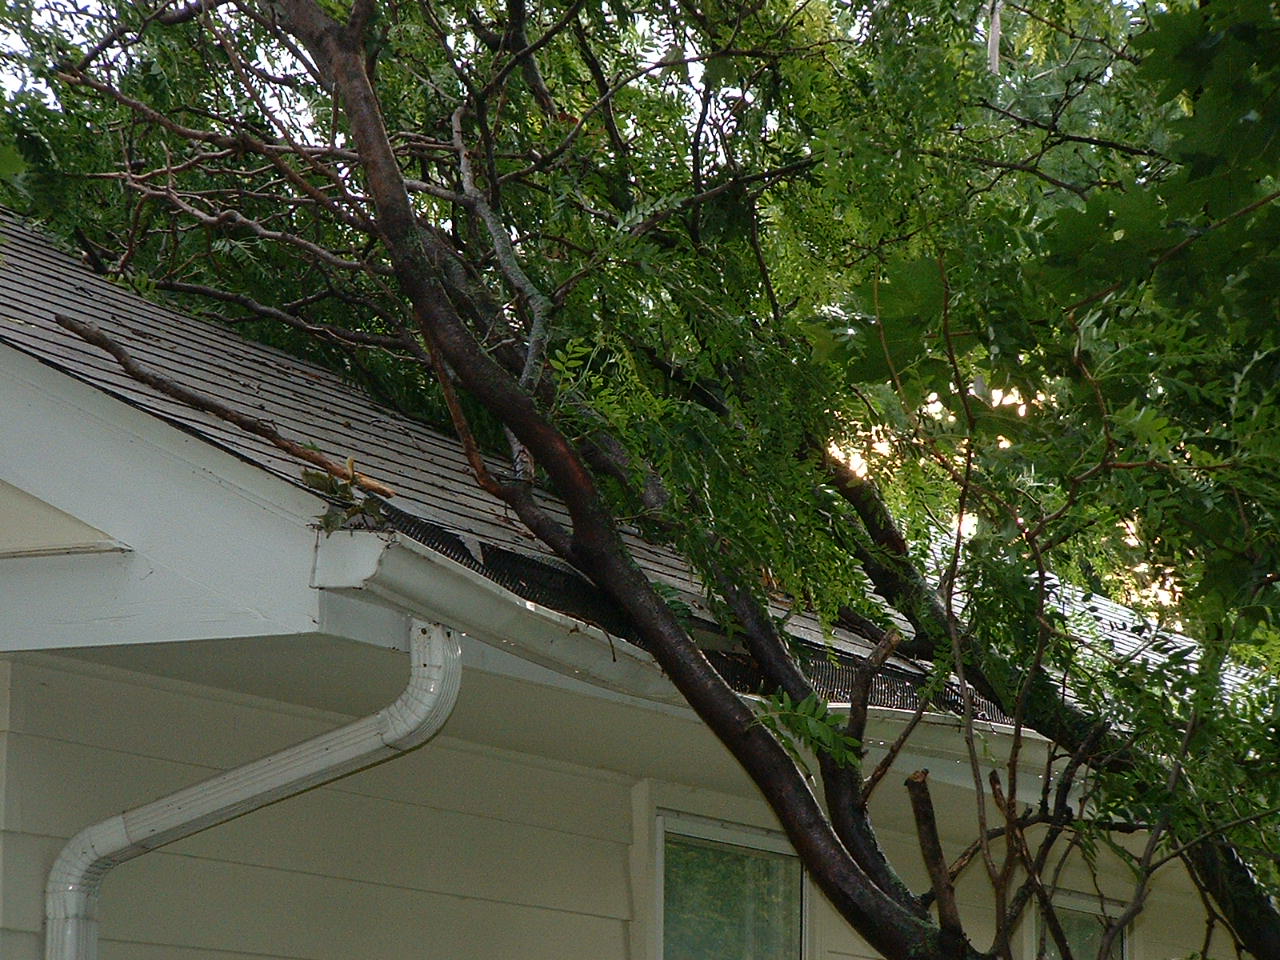 Closer look of the tree on the house.